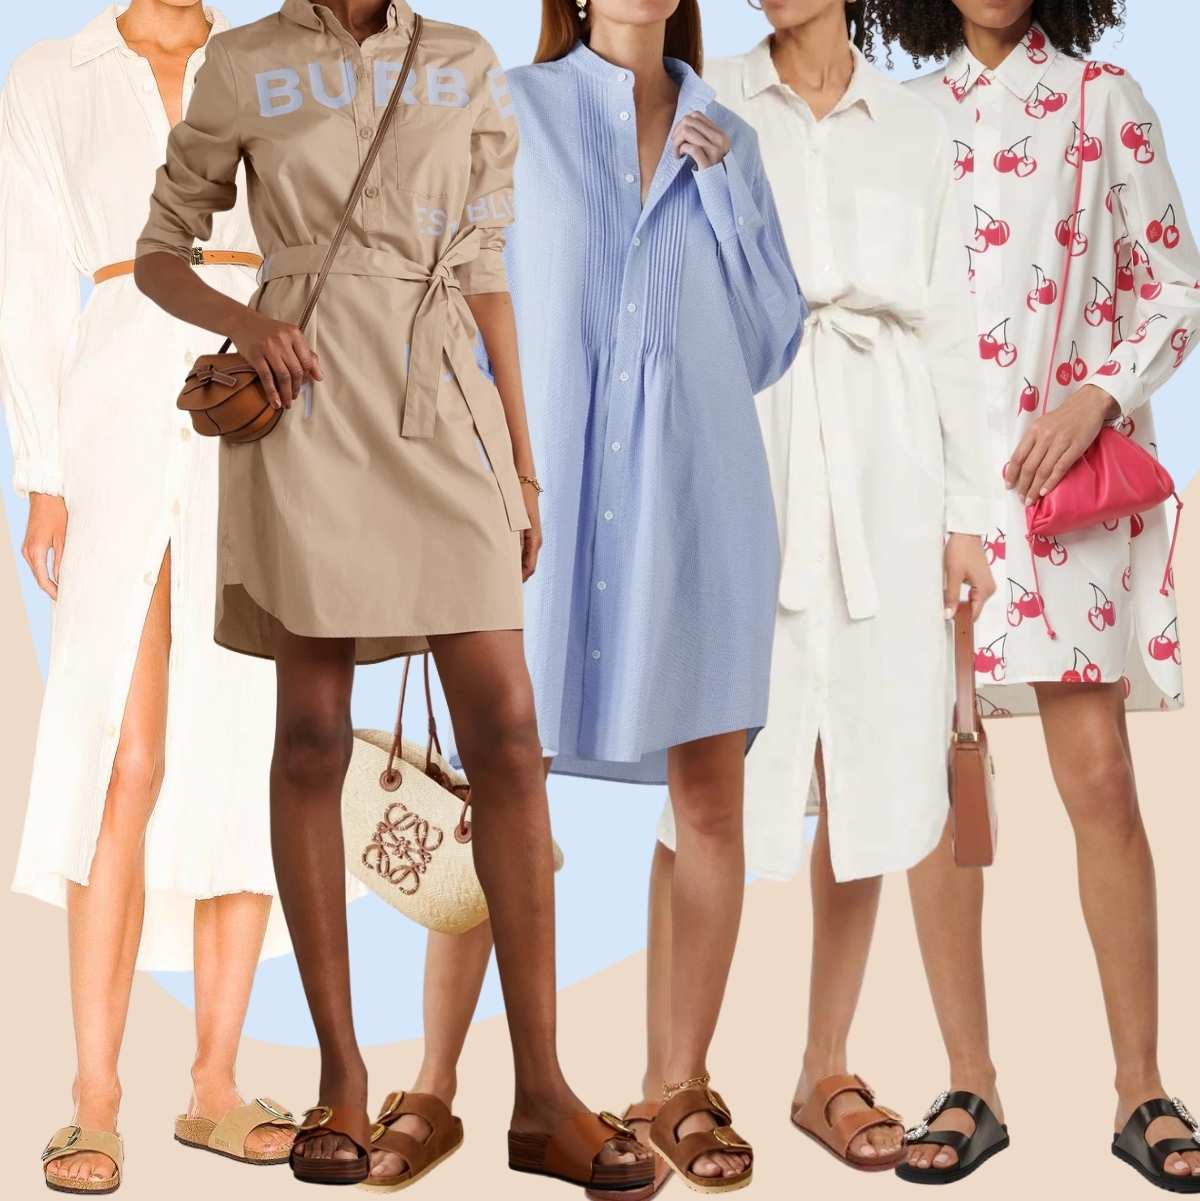 Collage of 5 women wearing different birkenstocks with a shirt dress.